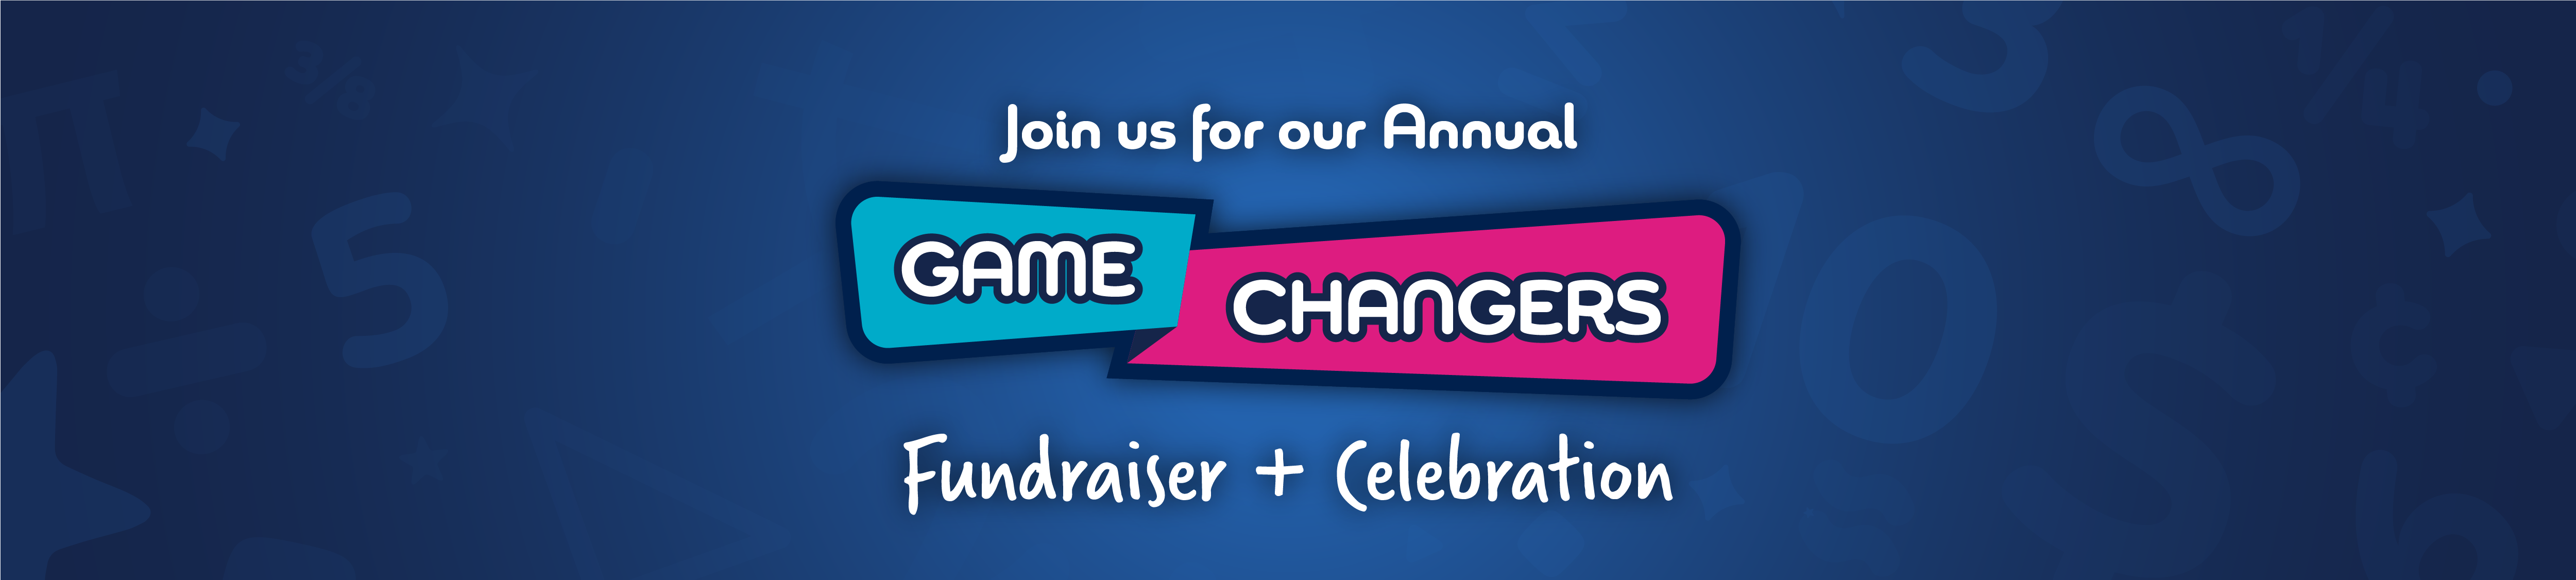 Join us for our Annual Game Changers Fundraiser + Celebration!